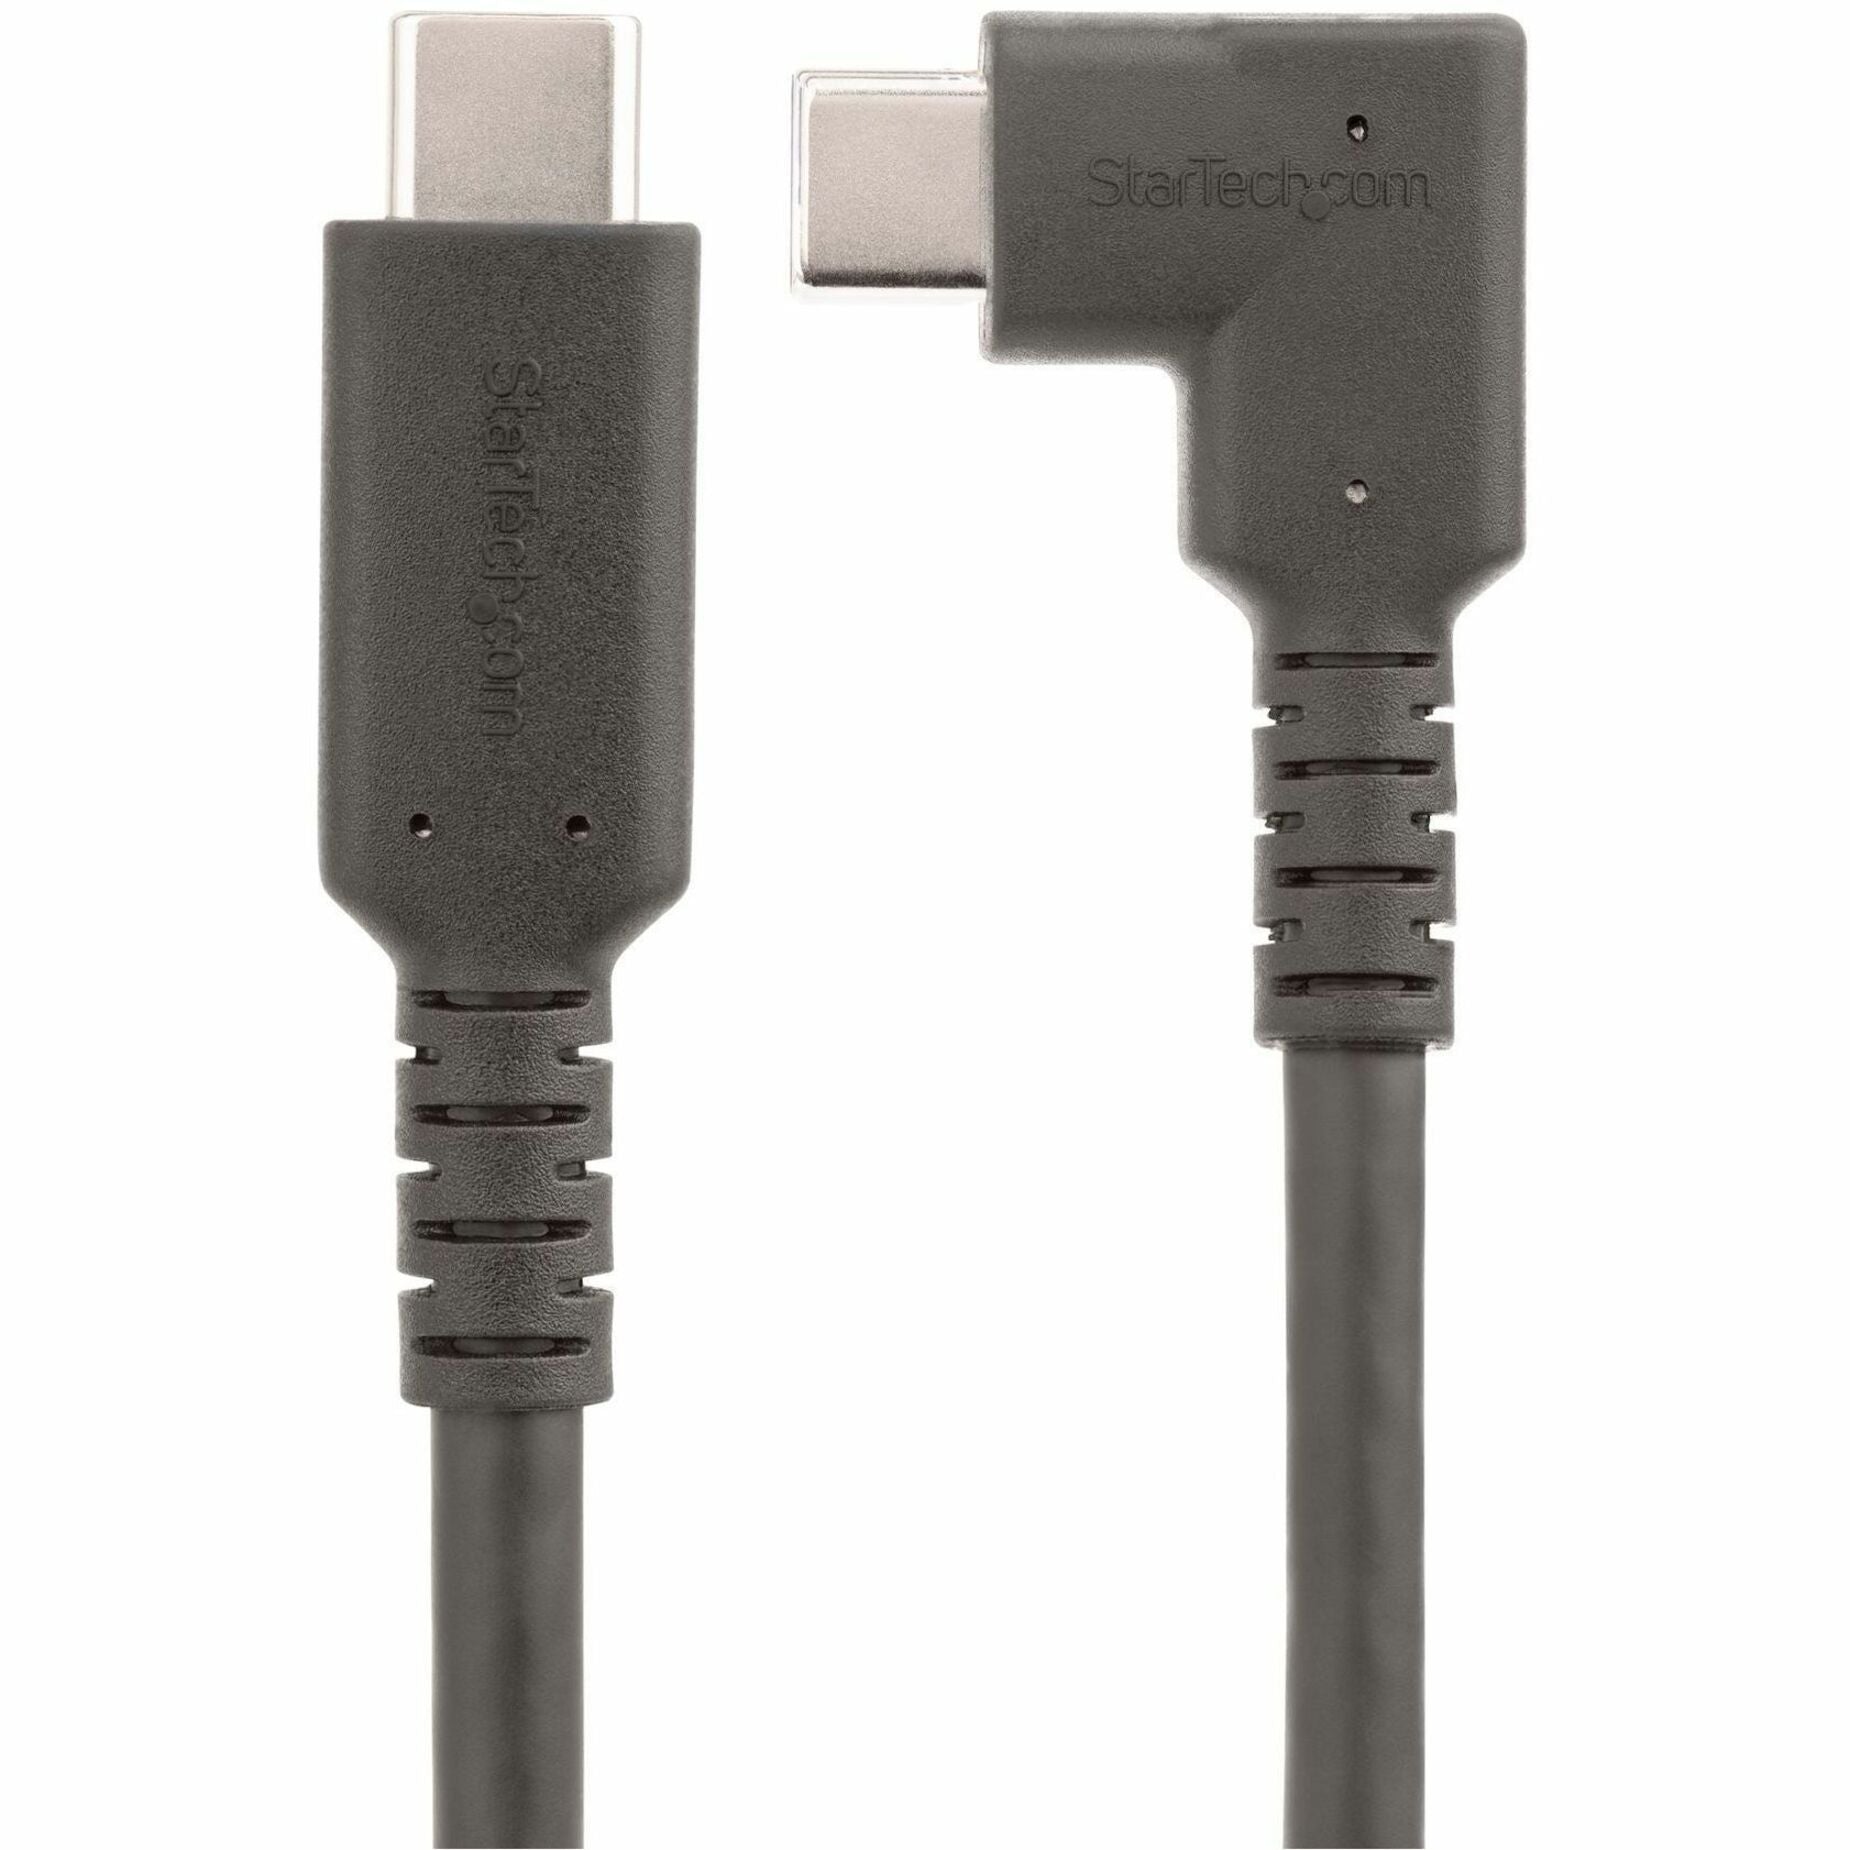 USB-C Data Transfer Cable - 3 ft, 10 Gbit/s, 90° Angled Connector (RUSB31CC1MBR)